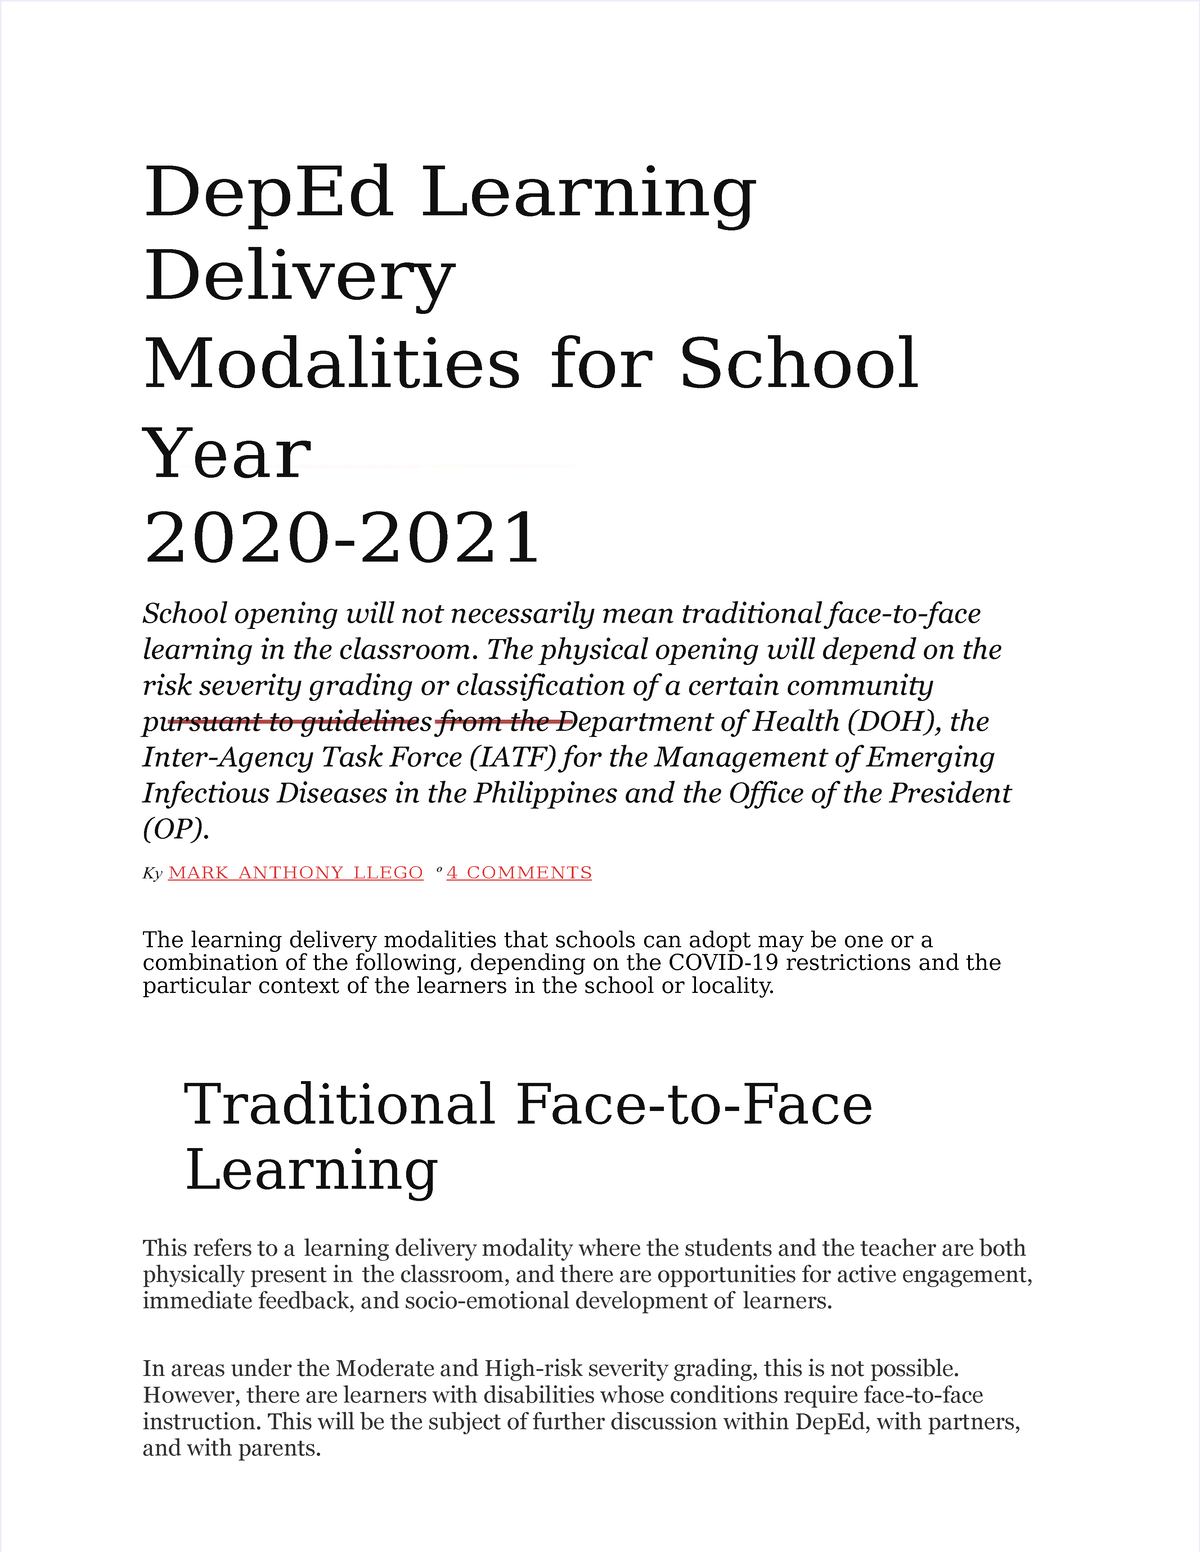 Deped Learning Delivery Modalities 2020 Youtube Gamba 0208